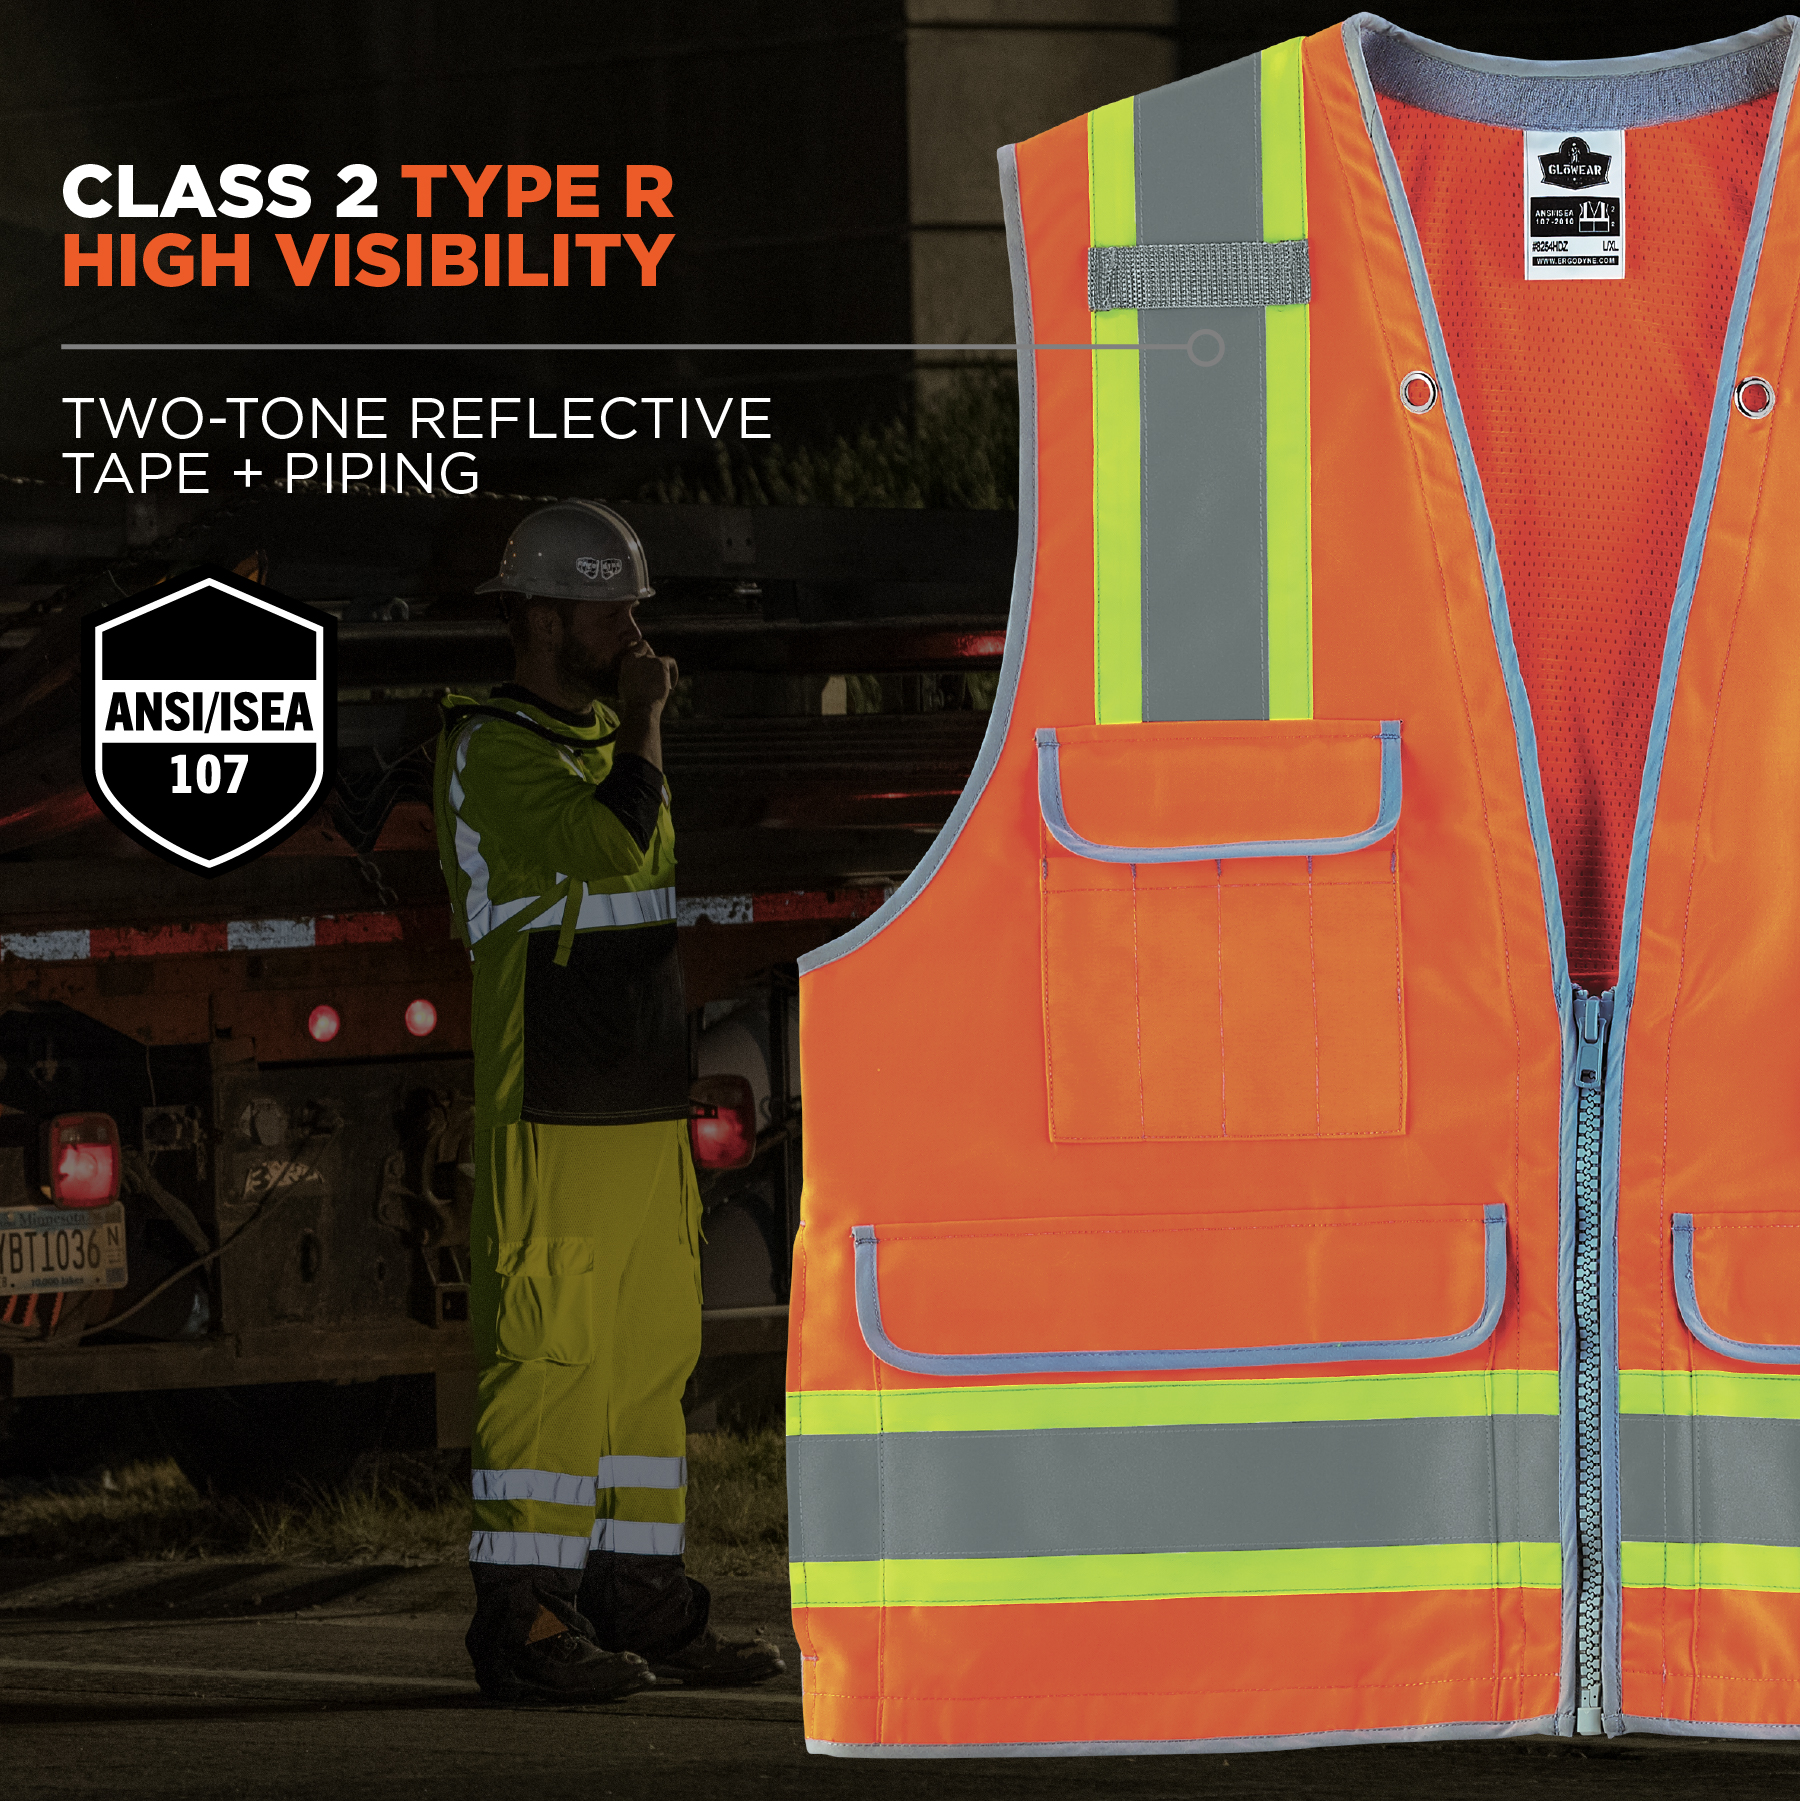 Safetyware - DELTA PLUS Panostyle High Visibility Working Jacket